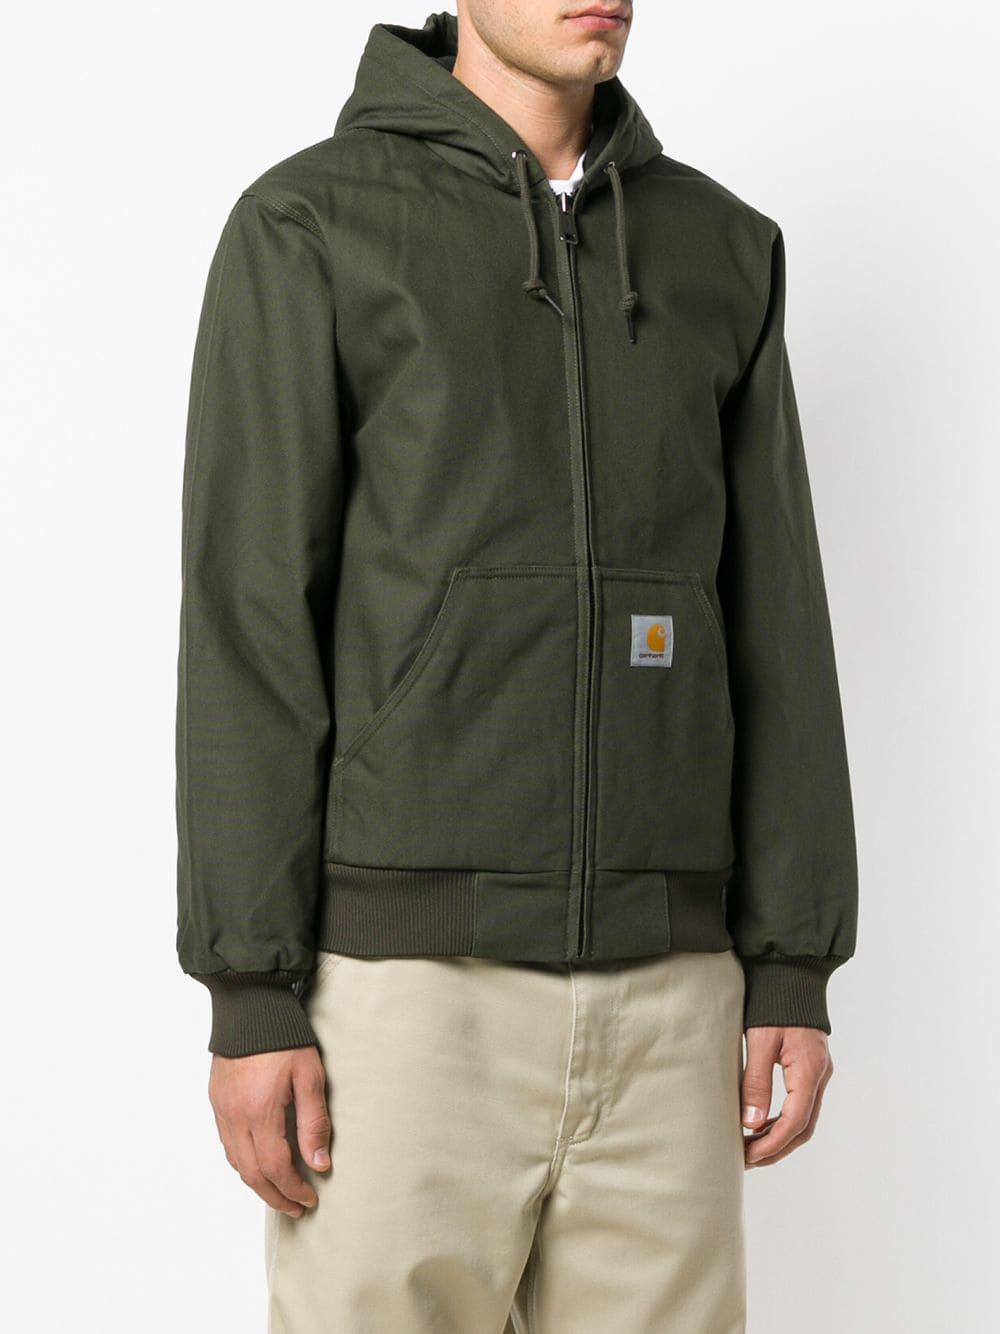 Lyst - Carhartt Classic Hooded Jacket in Green for Men